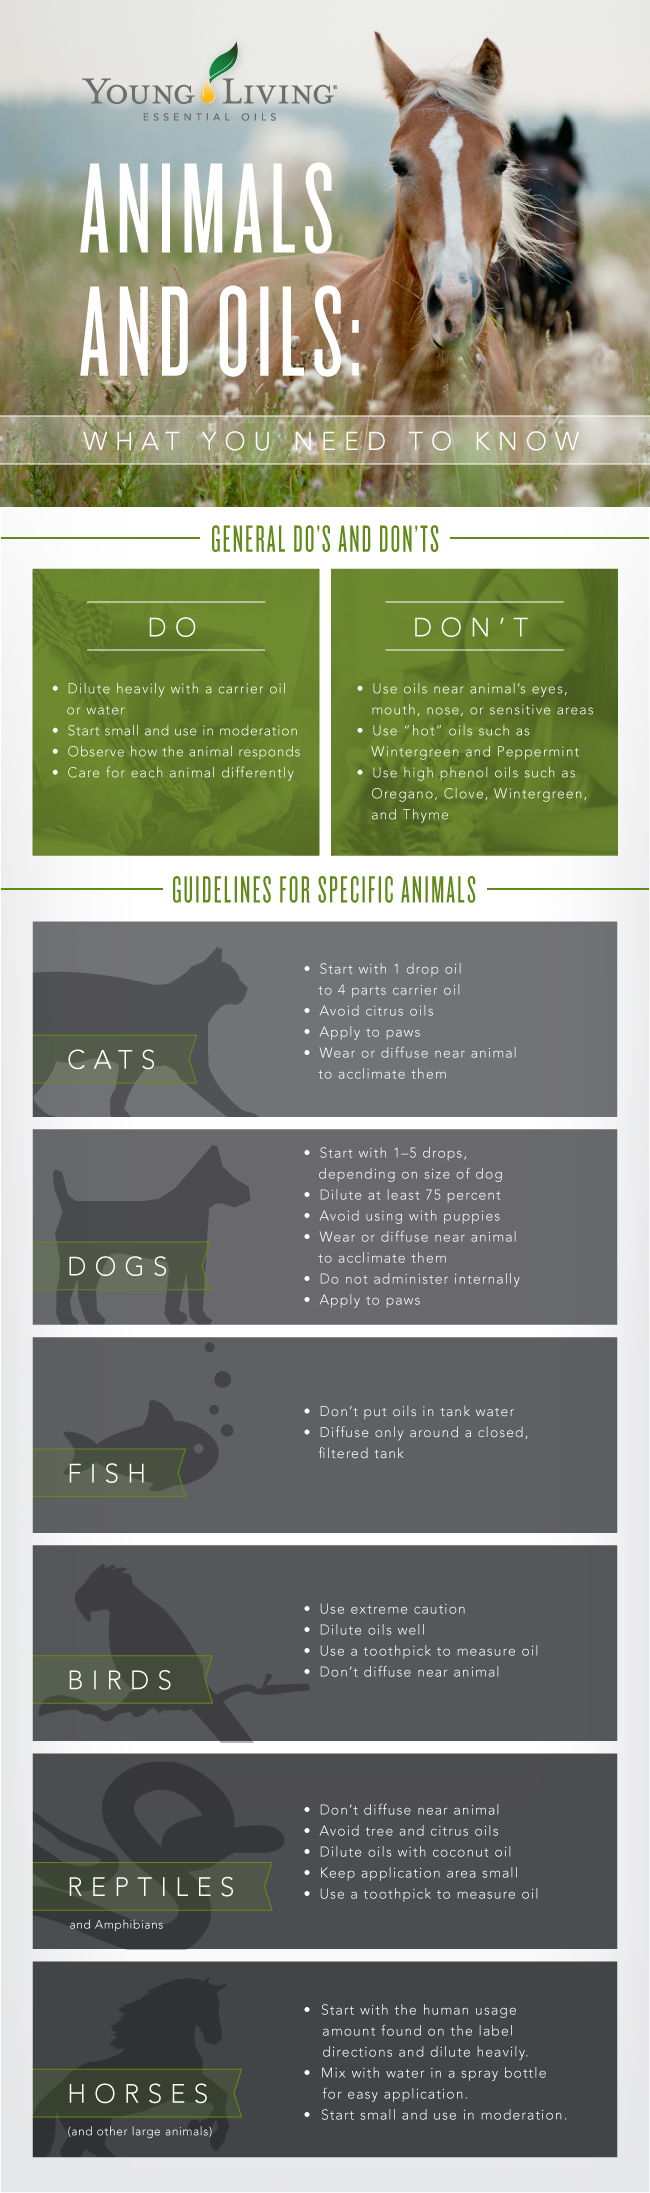 are essential oil diffusers safe for dogs and cats